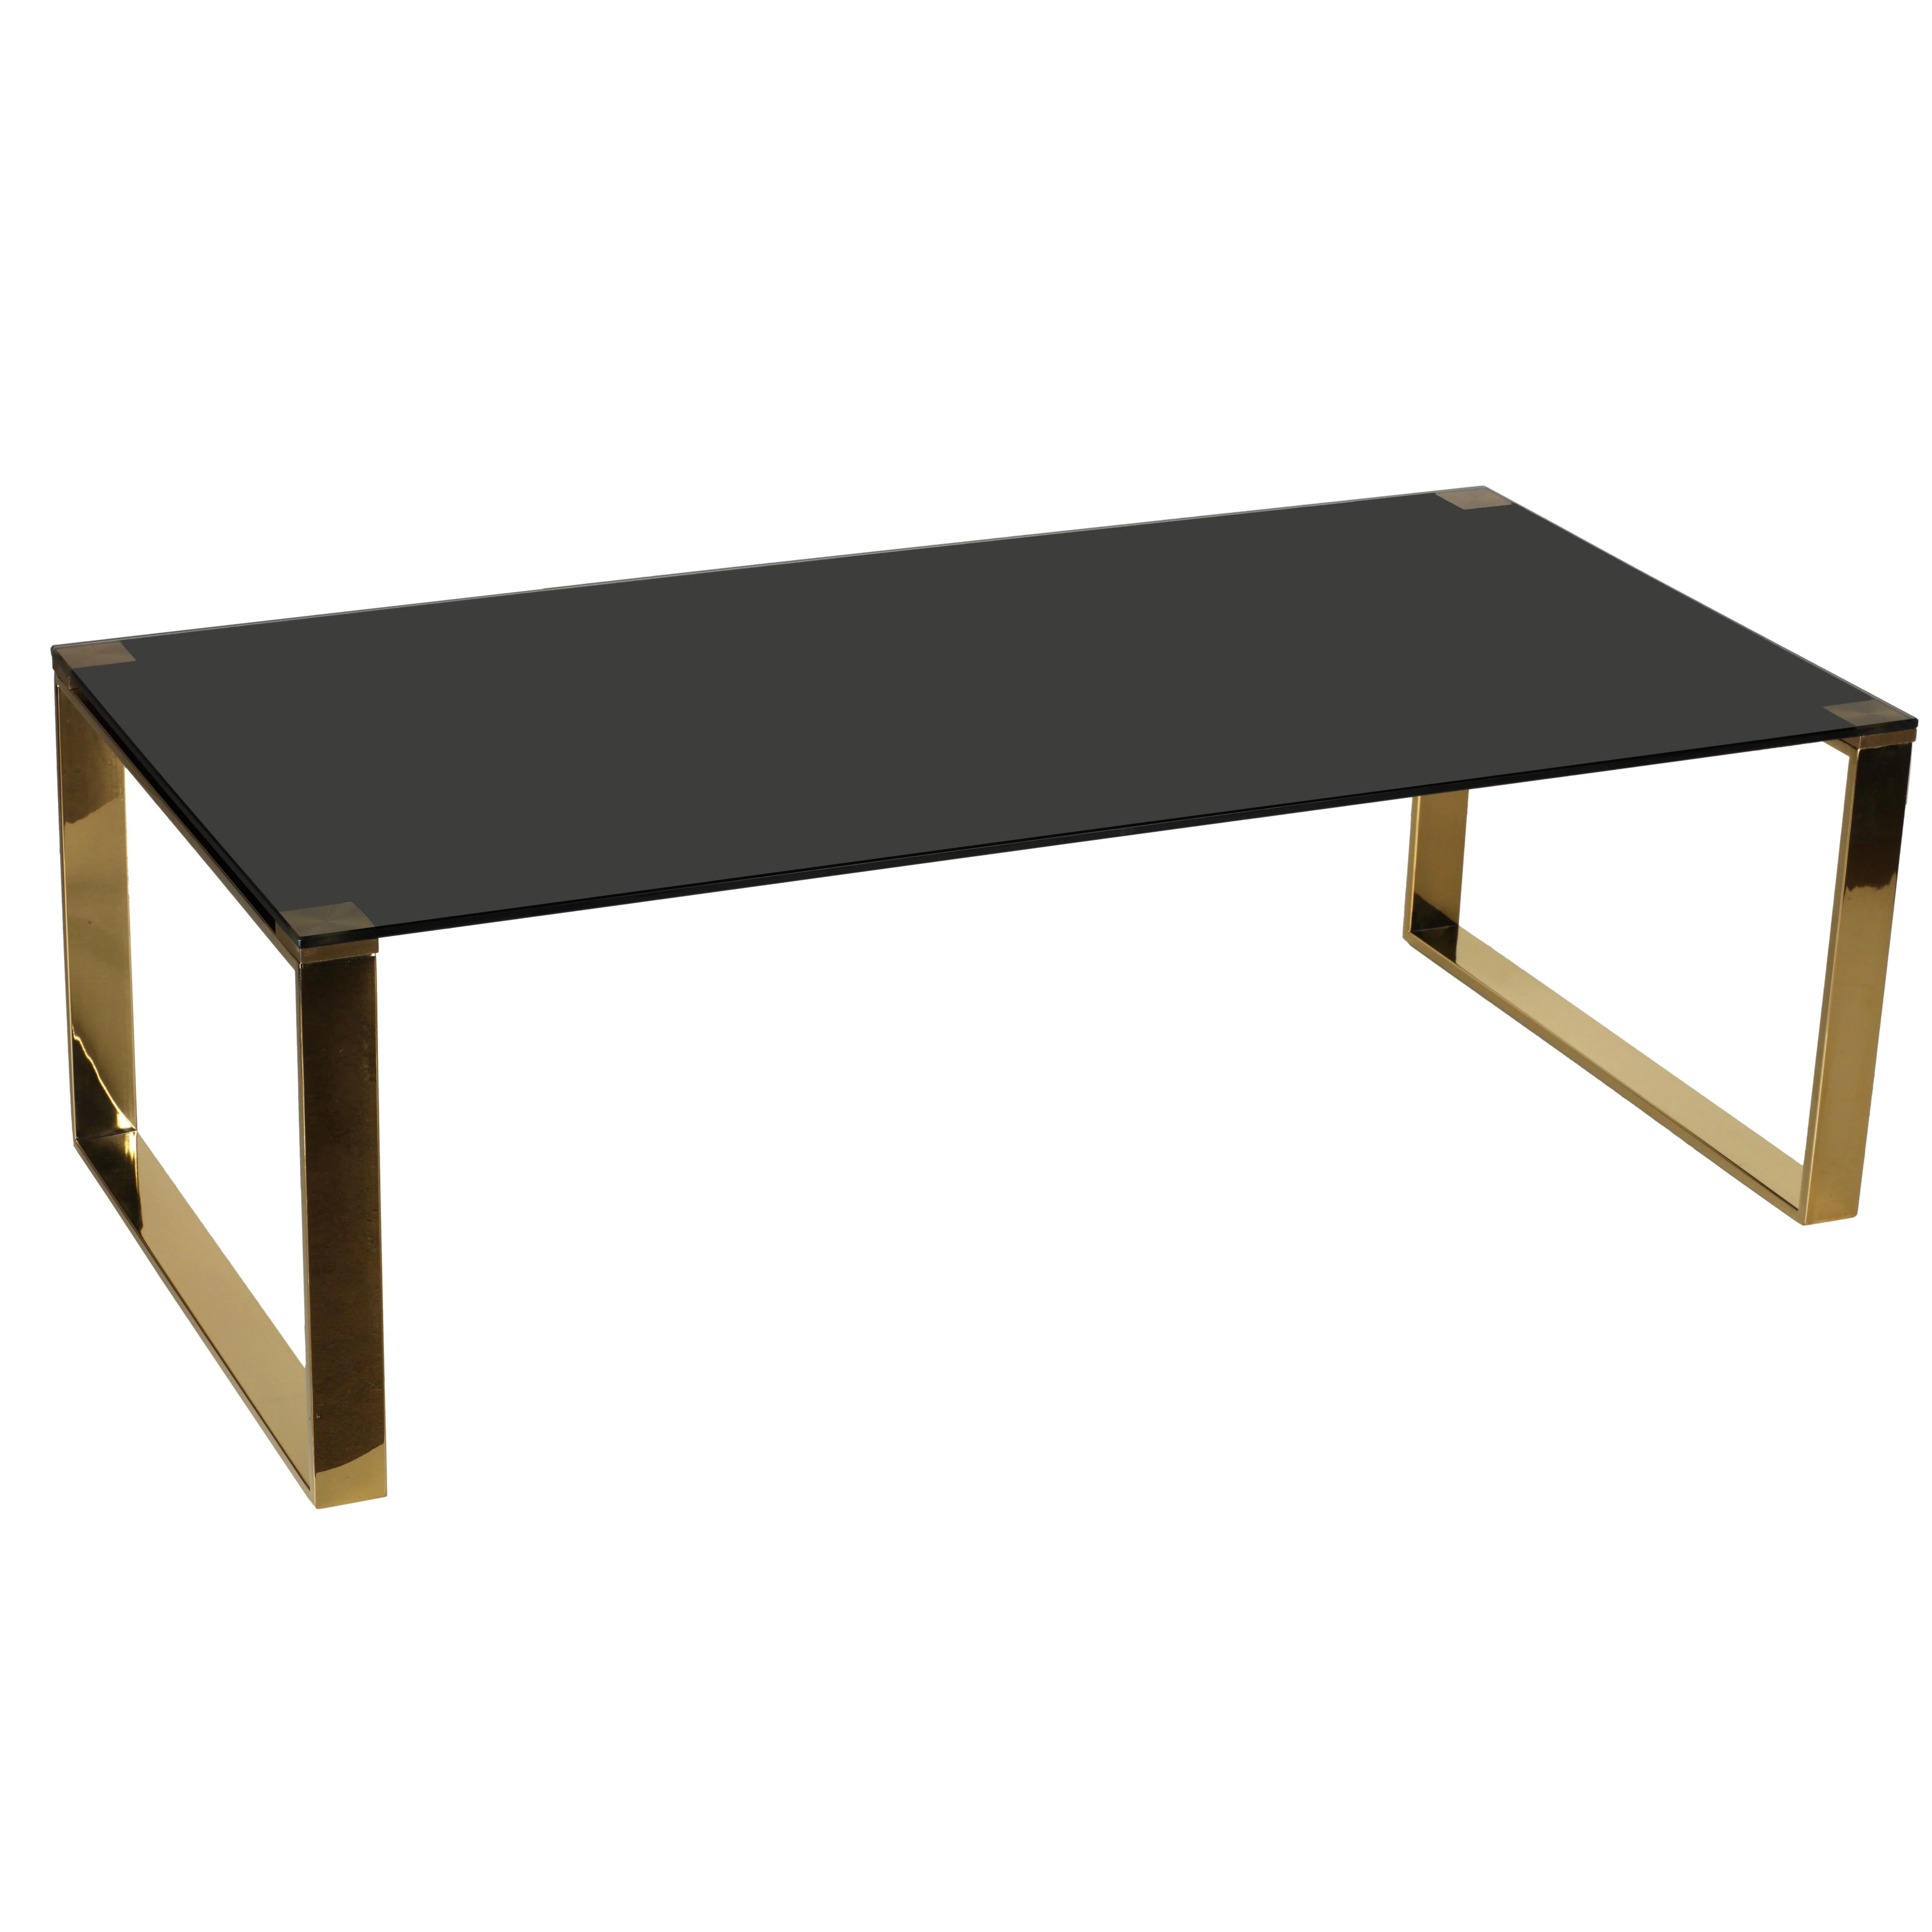 cortesi home remini gold finish metal and black tempered glass coffee table carmen accent free shipping today brass bedside lamp cement silver round target throw pillows small